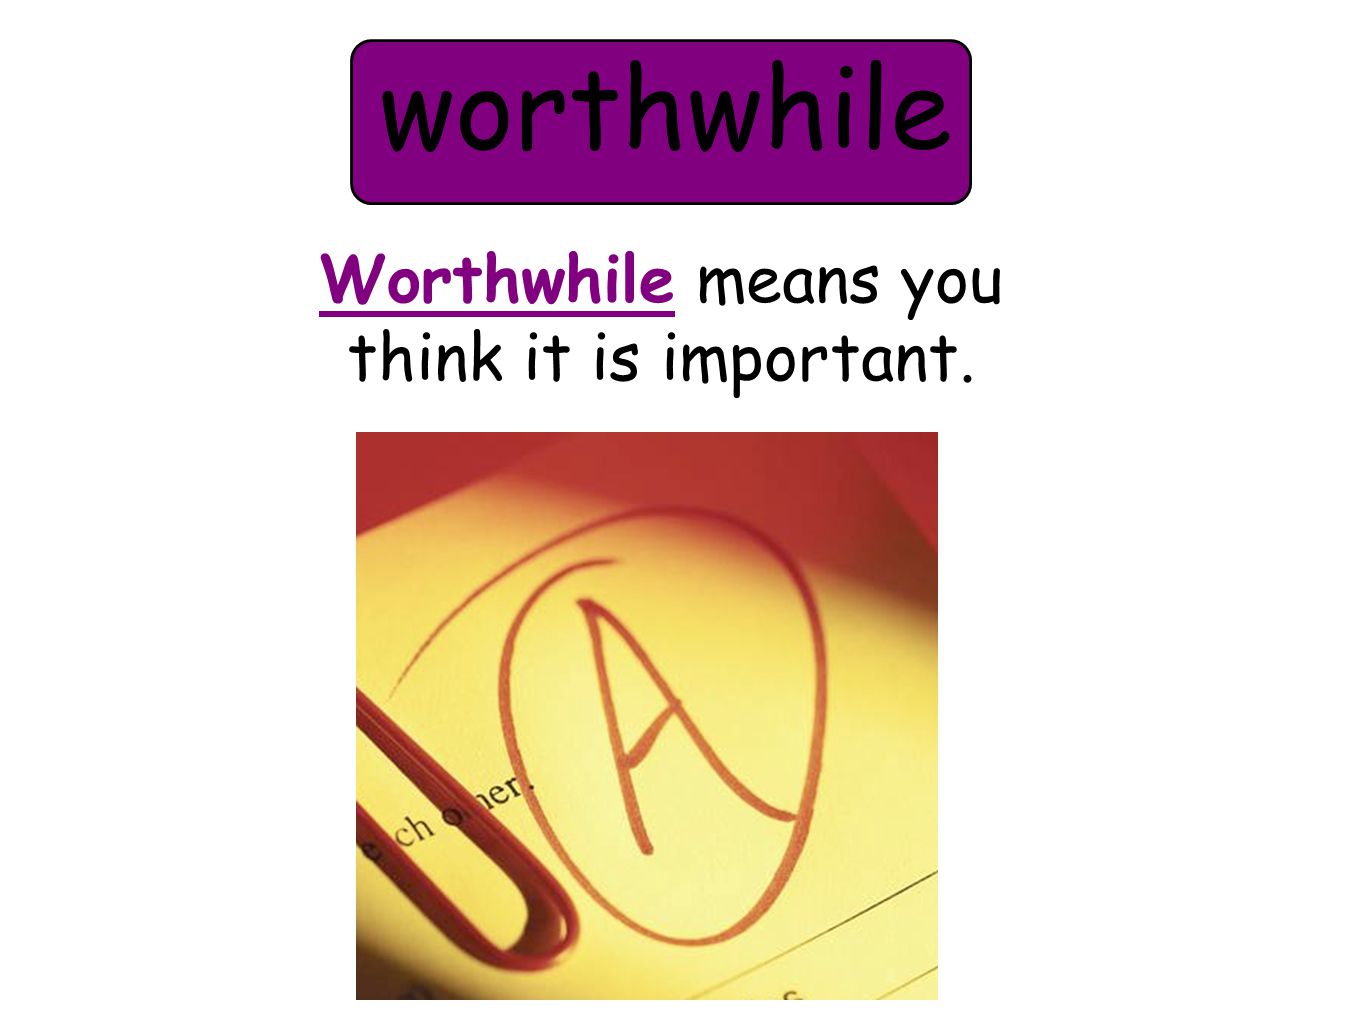 worthwhile Worthwhile means you think it is important.